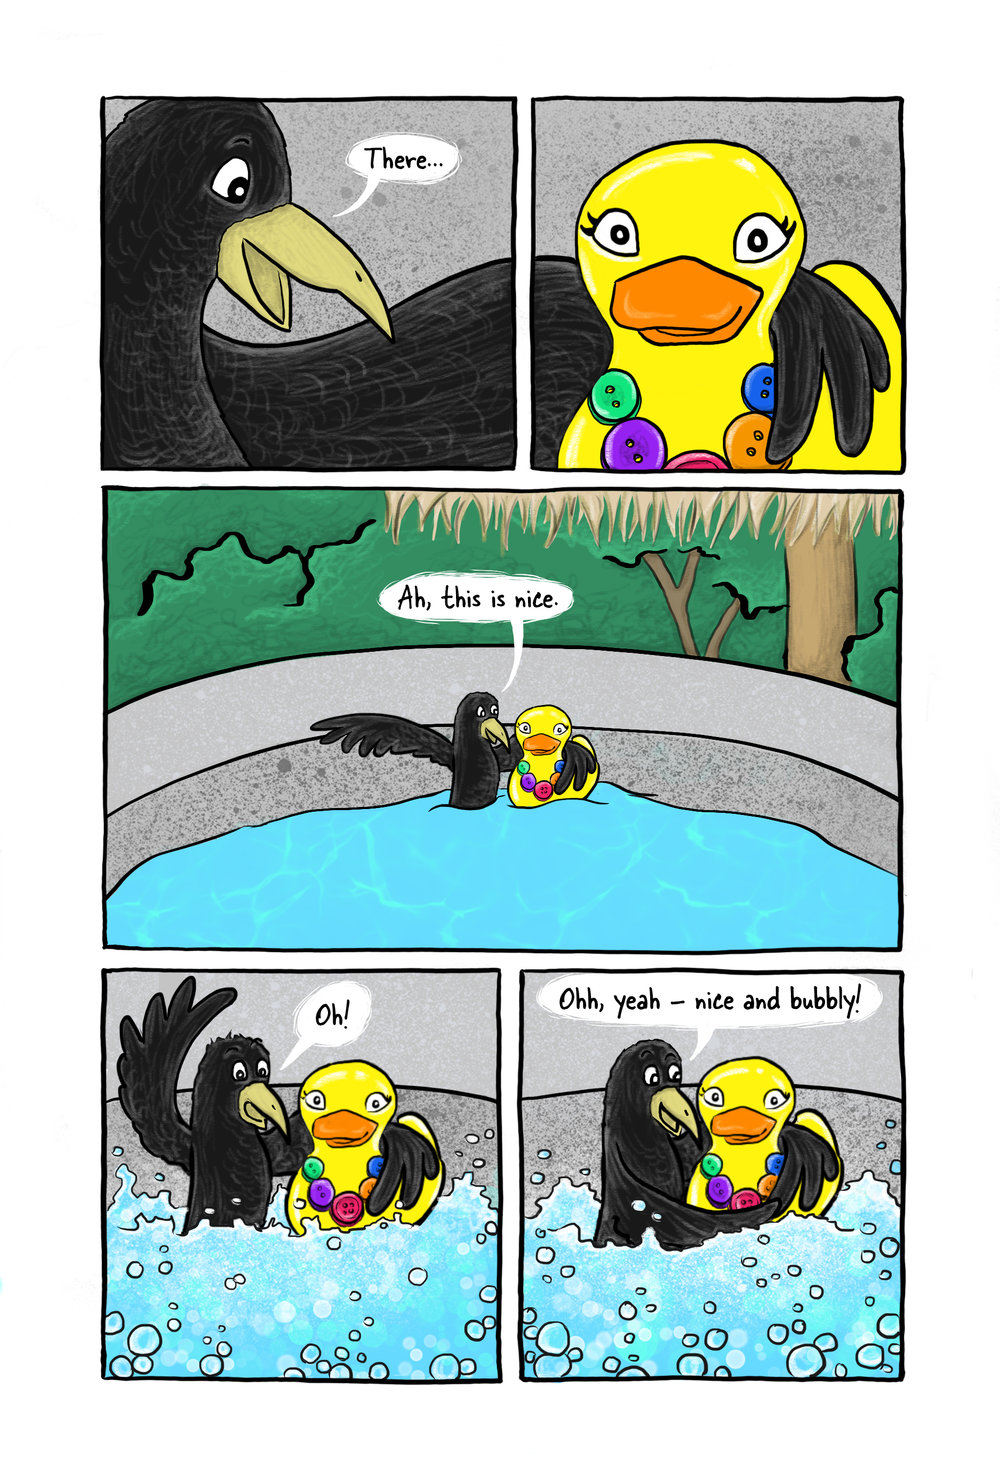 Page 5 Mr. Buttons gets cozy in the hot tub with the duck